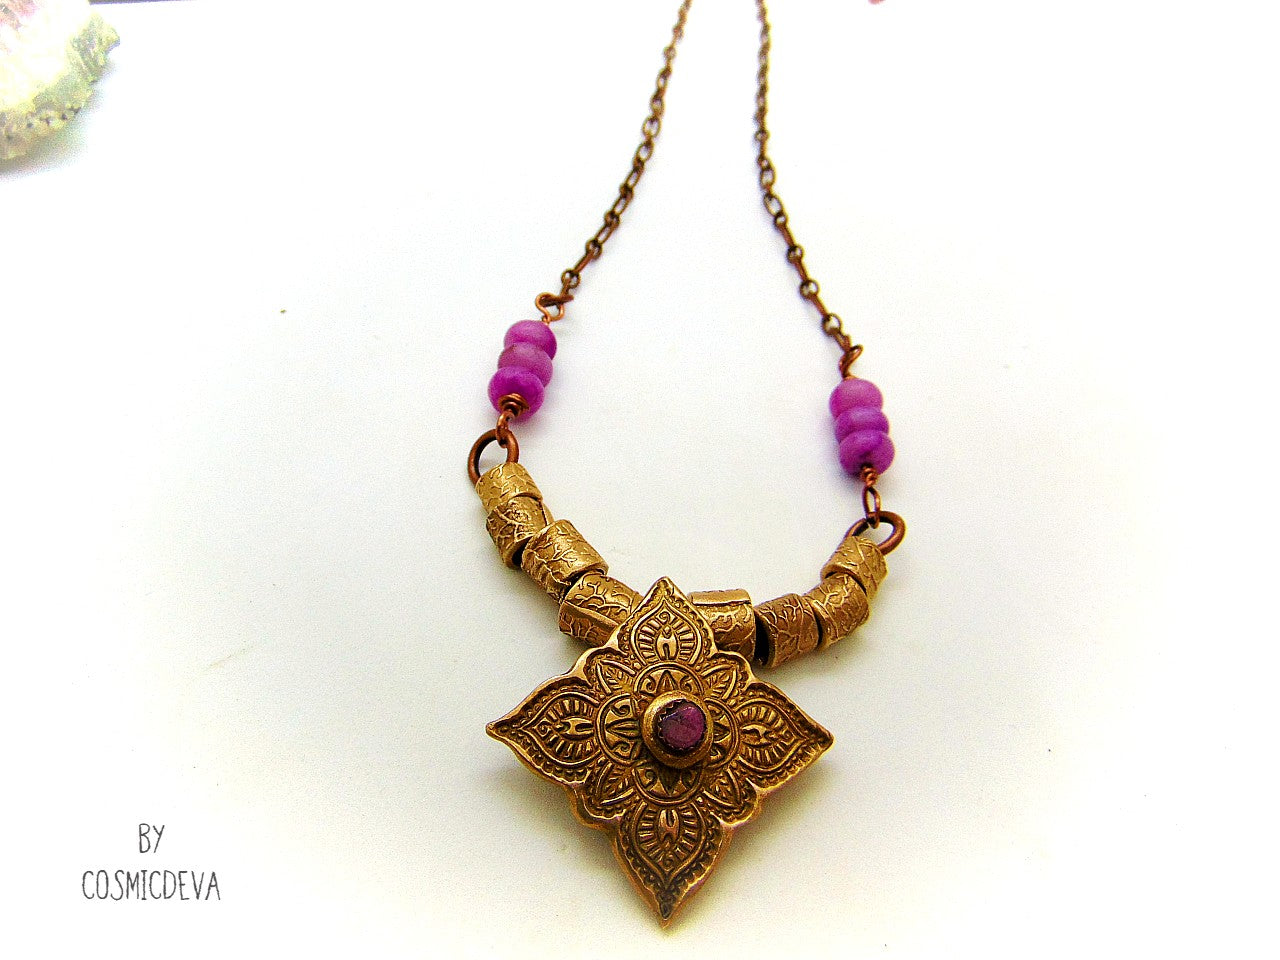 This unique spiritual yoga meditation necklace features a hand formed bronze mandala pendant with a beautiful natural pink tourmaline gemstone as a focal point. This Indian inspired mehndi mandala pendant suspends from a copper/brass chain with beautiful handcrafted gold bronze tube beads and lovely pink jasper gemstone rondelle beads.